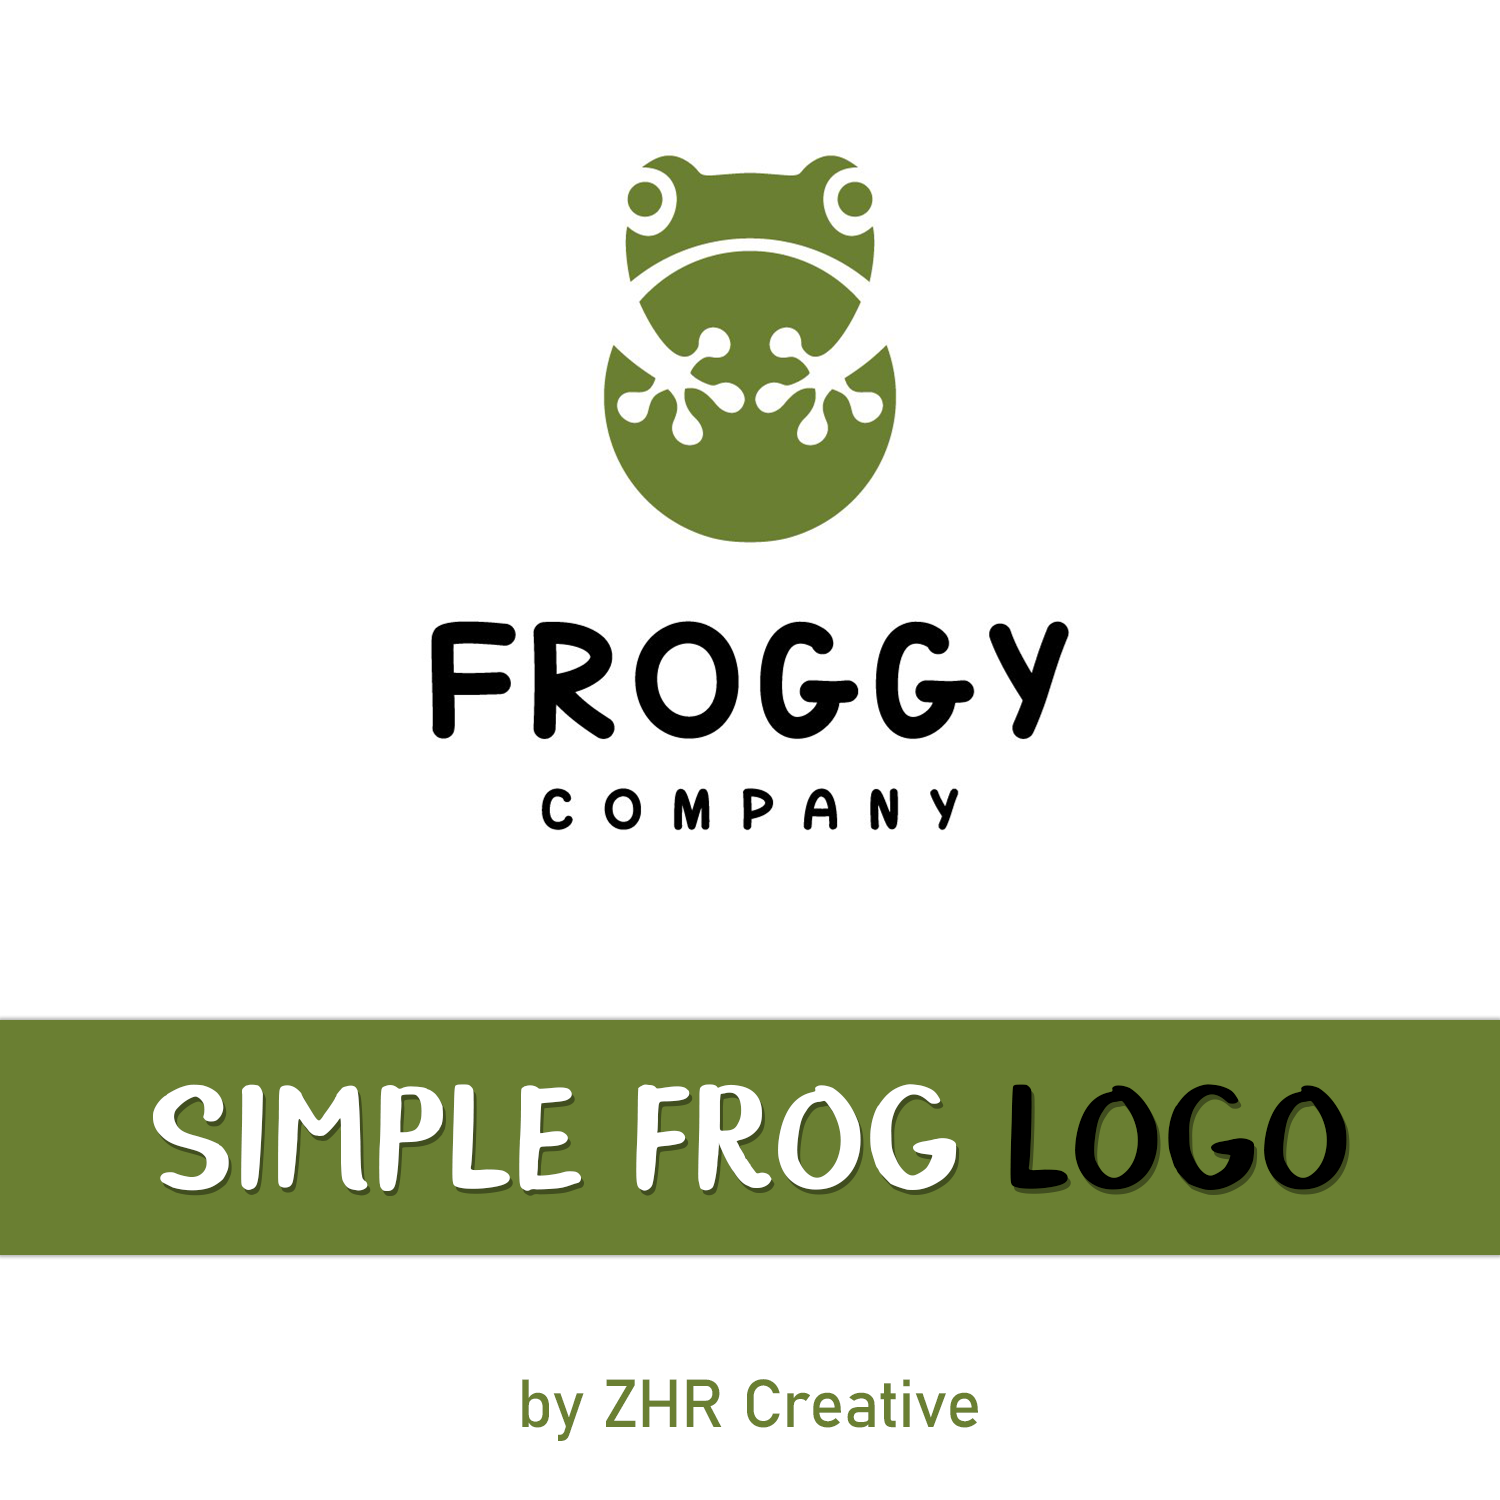 simple frog logo cover.